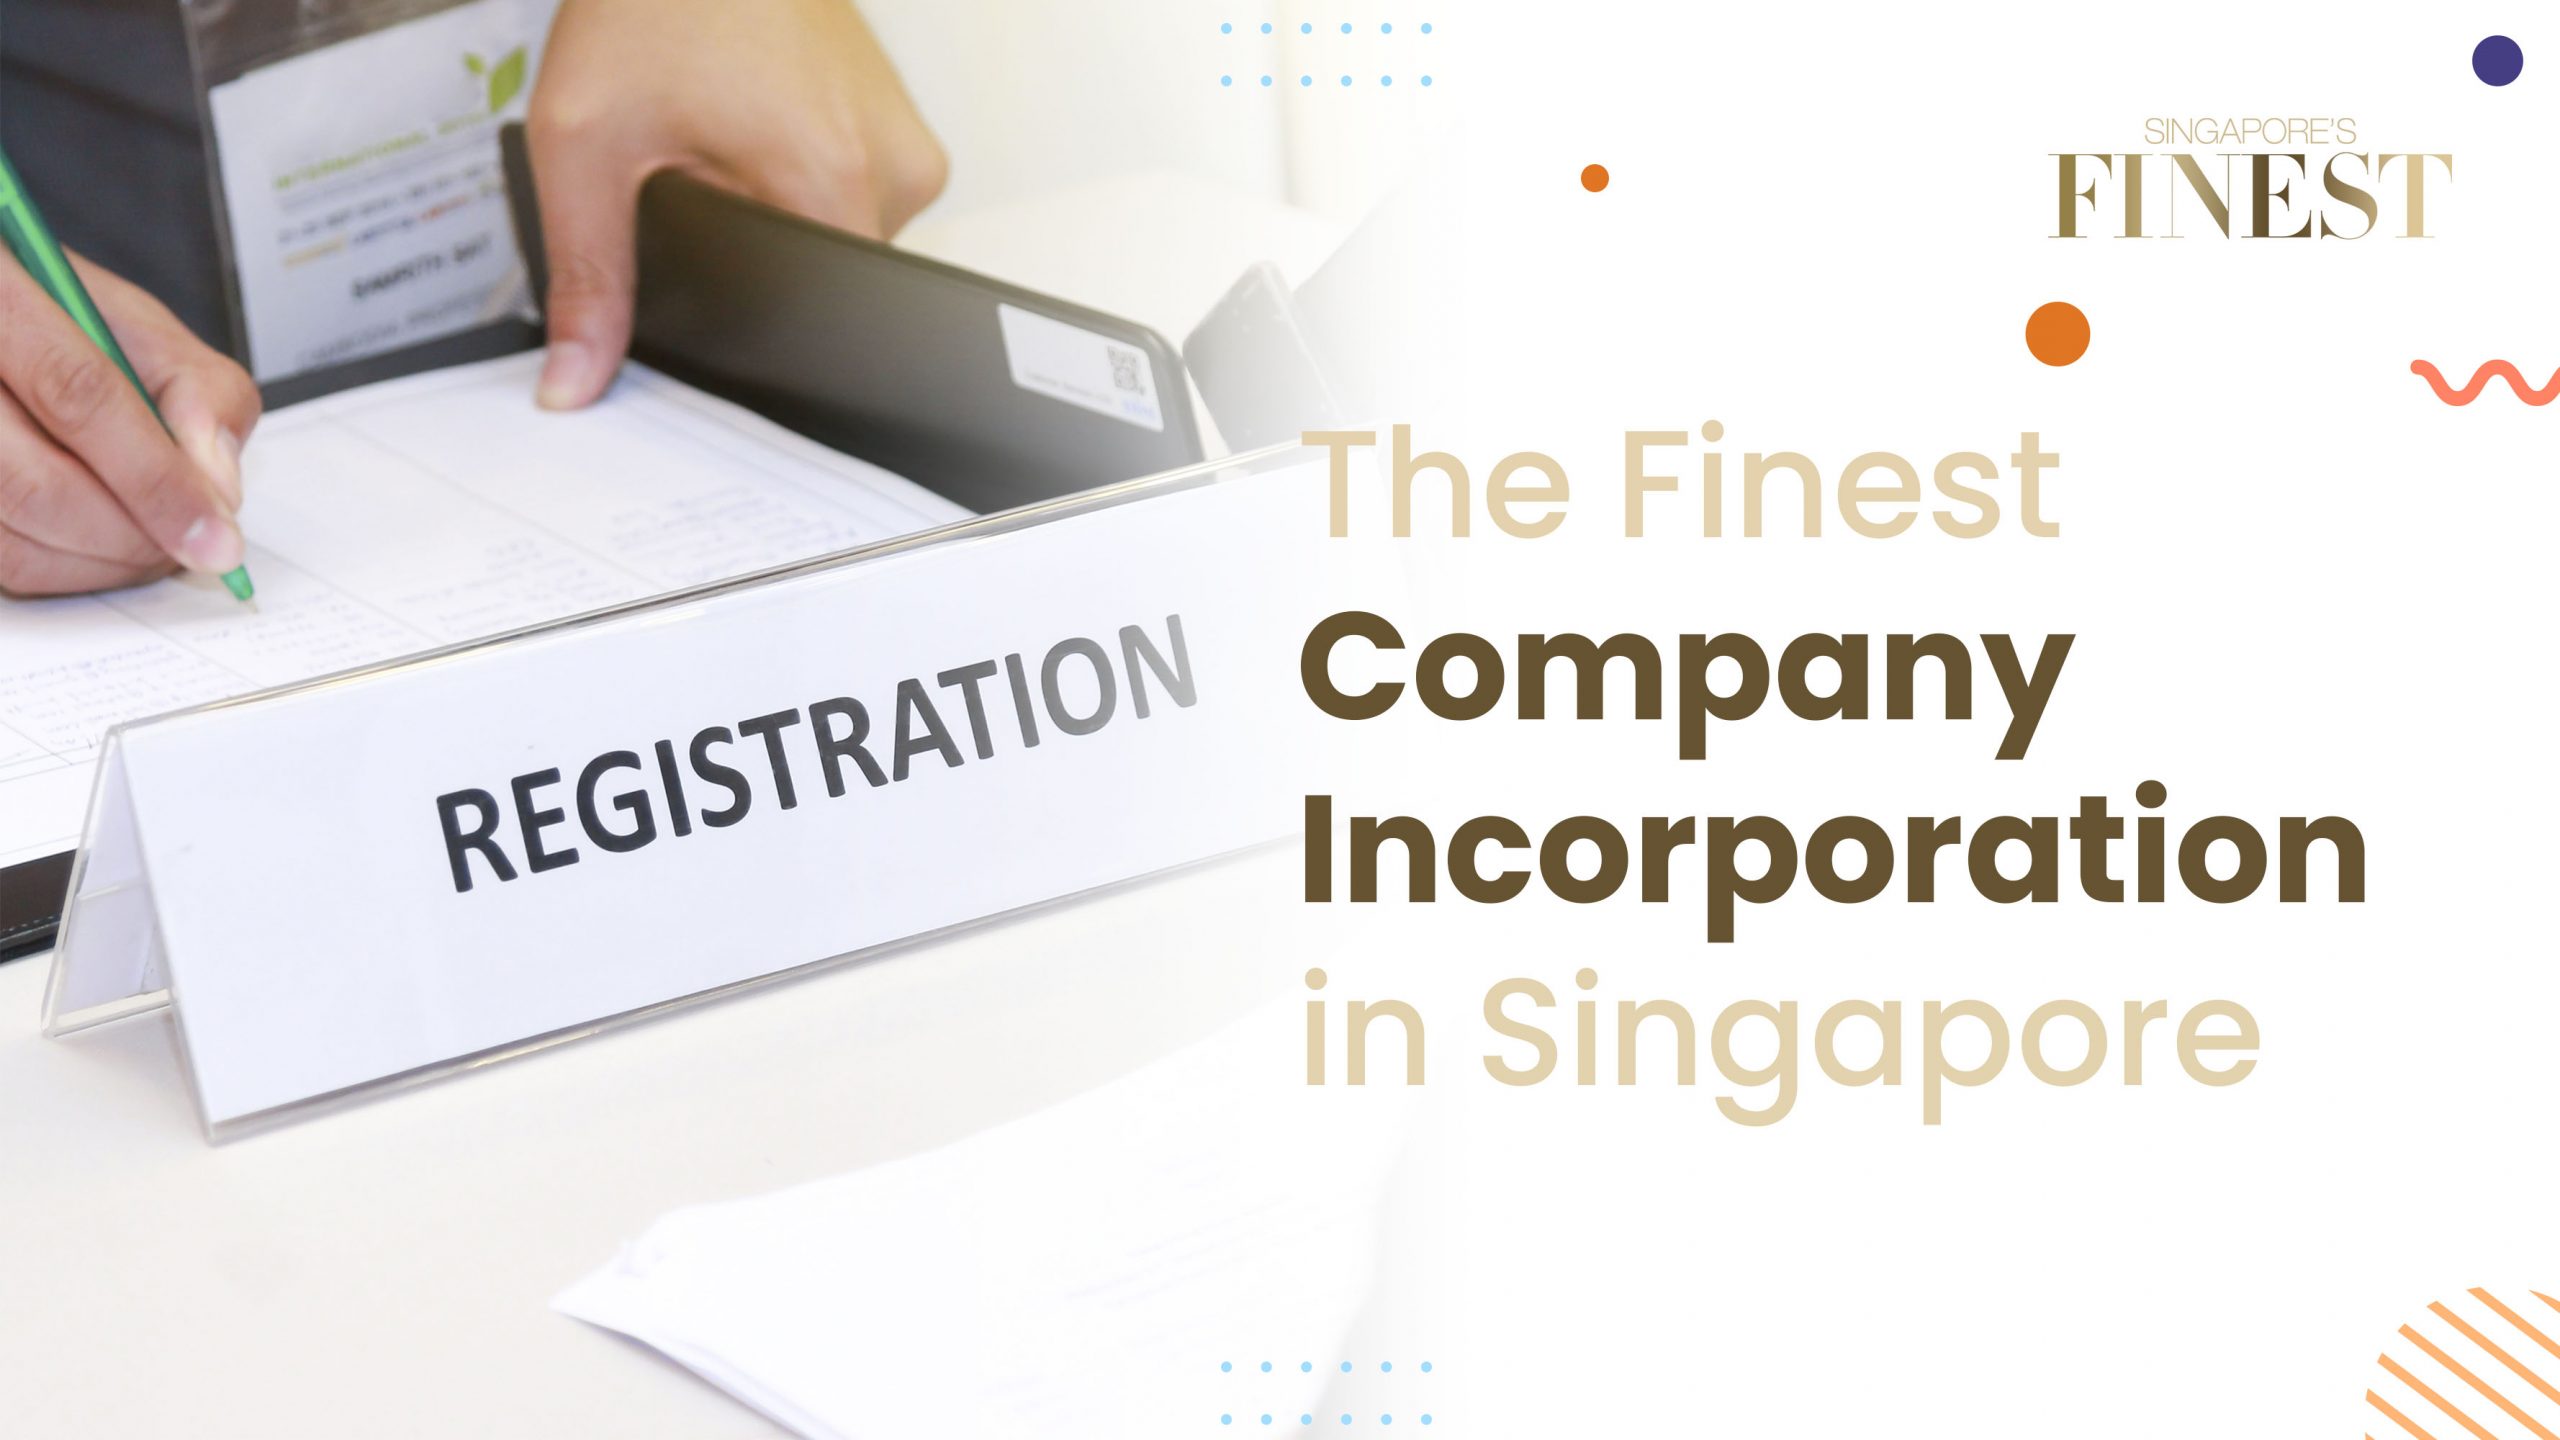 Company registration and business incorporation in Singapore